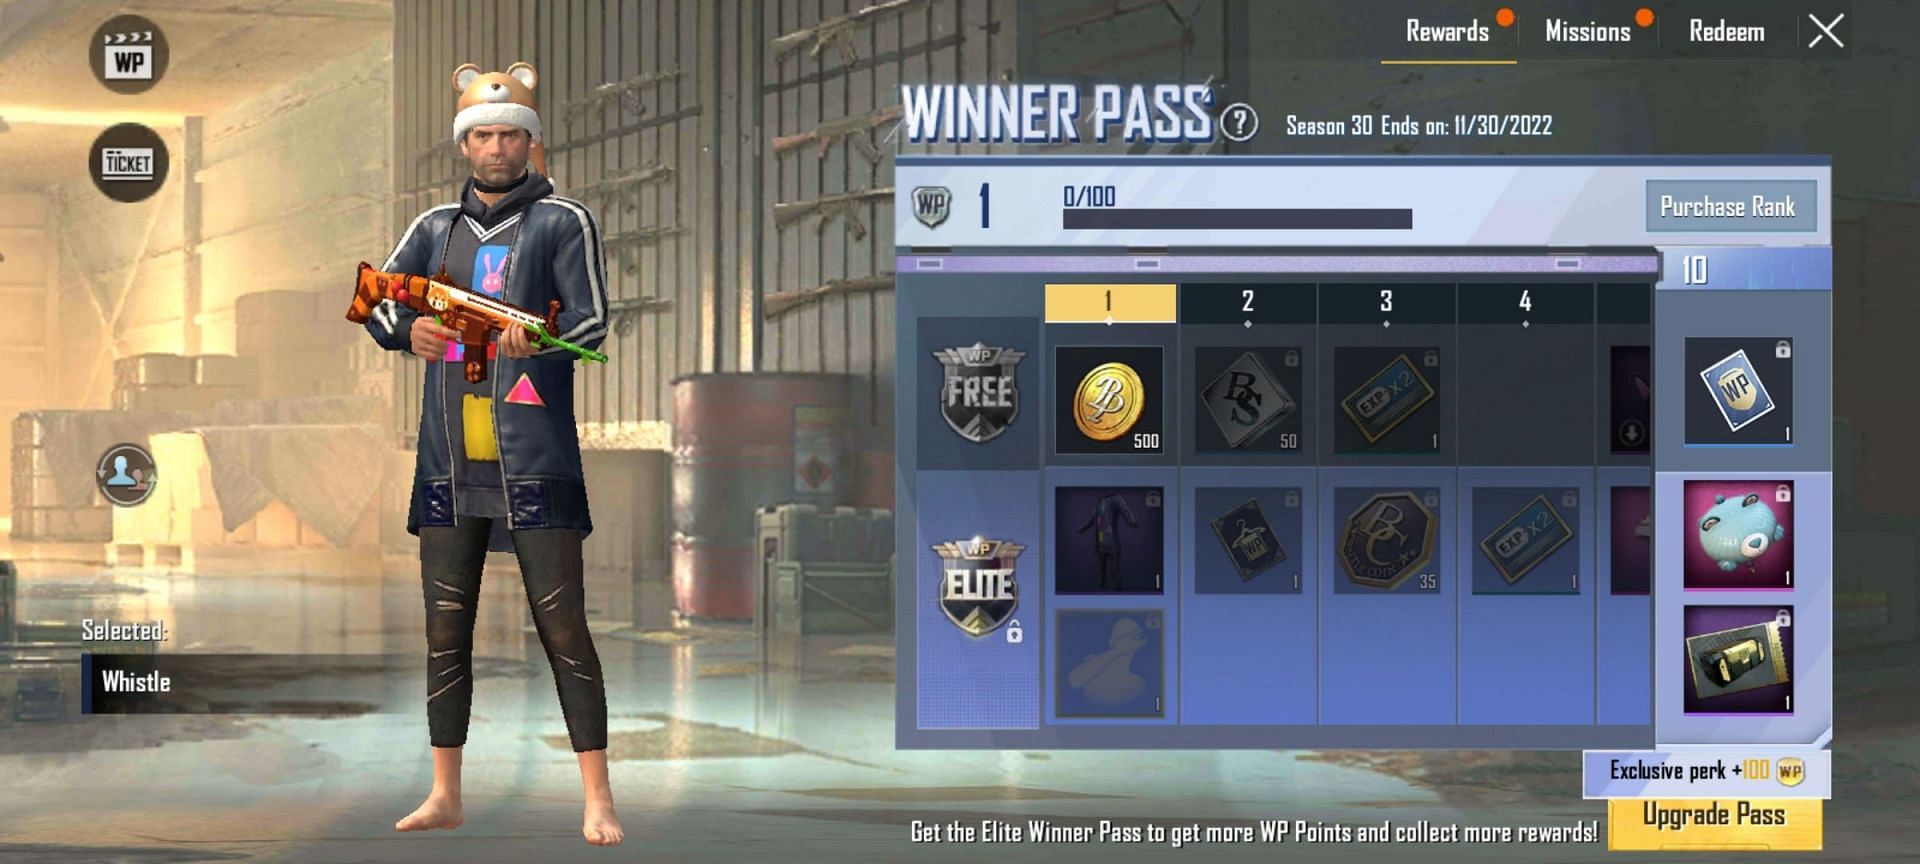 Whistle emote can be obtained by players (Image via PUBG Mobile Lite)